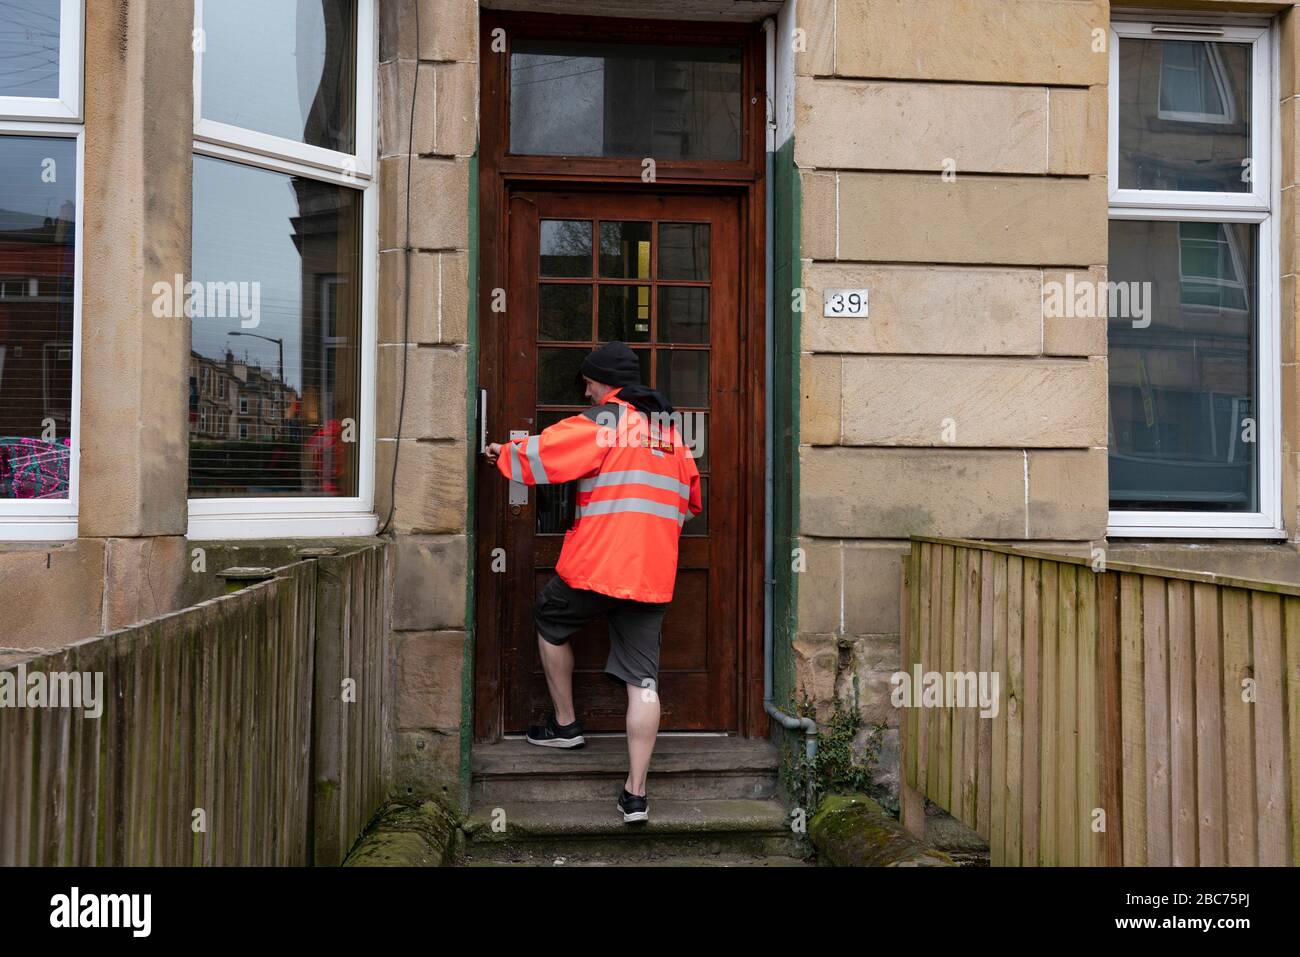 Glasgow, Scotland, UK. 3 April, 2020. Images from the southside of Glasgow at the end of the second week of Coronavirus lockdown. Pictured; Royal Mail postman making deliveries in Shawlands. Iain Masterton/Alamy Live News Stock Photo